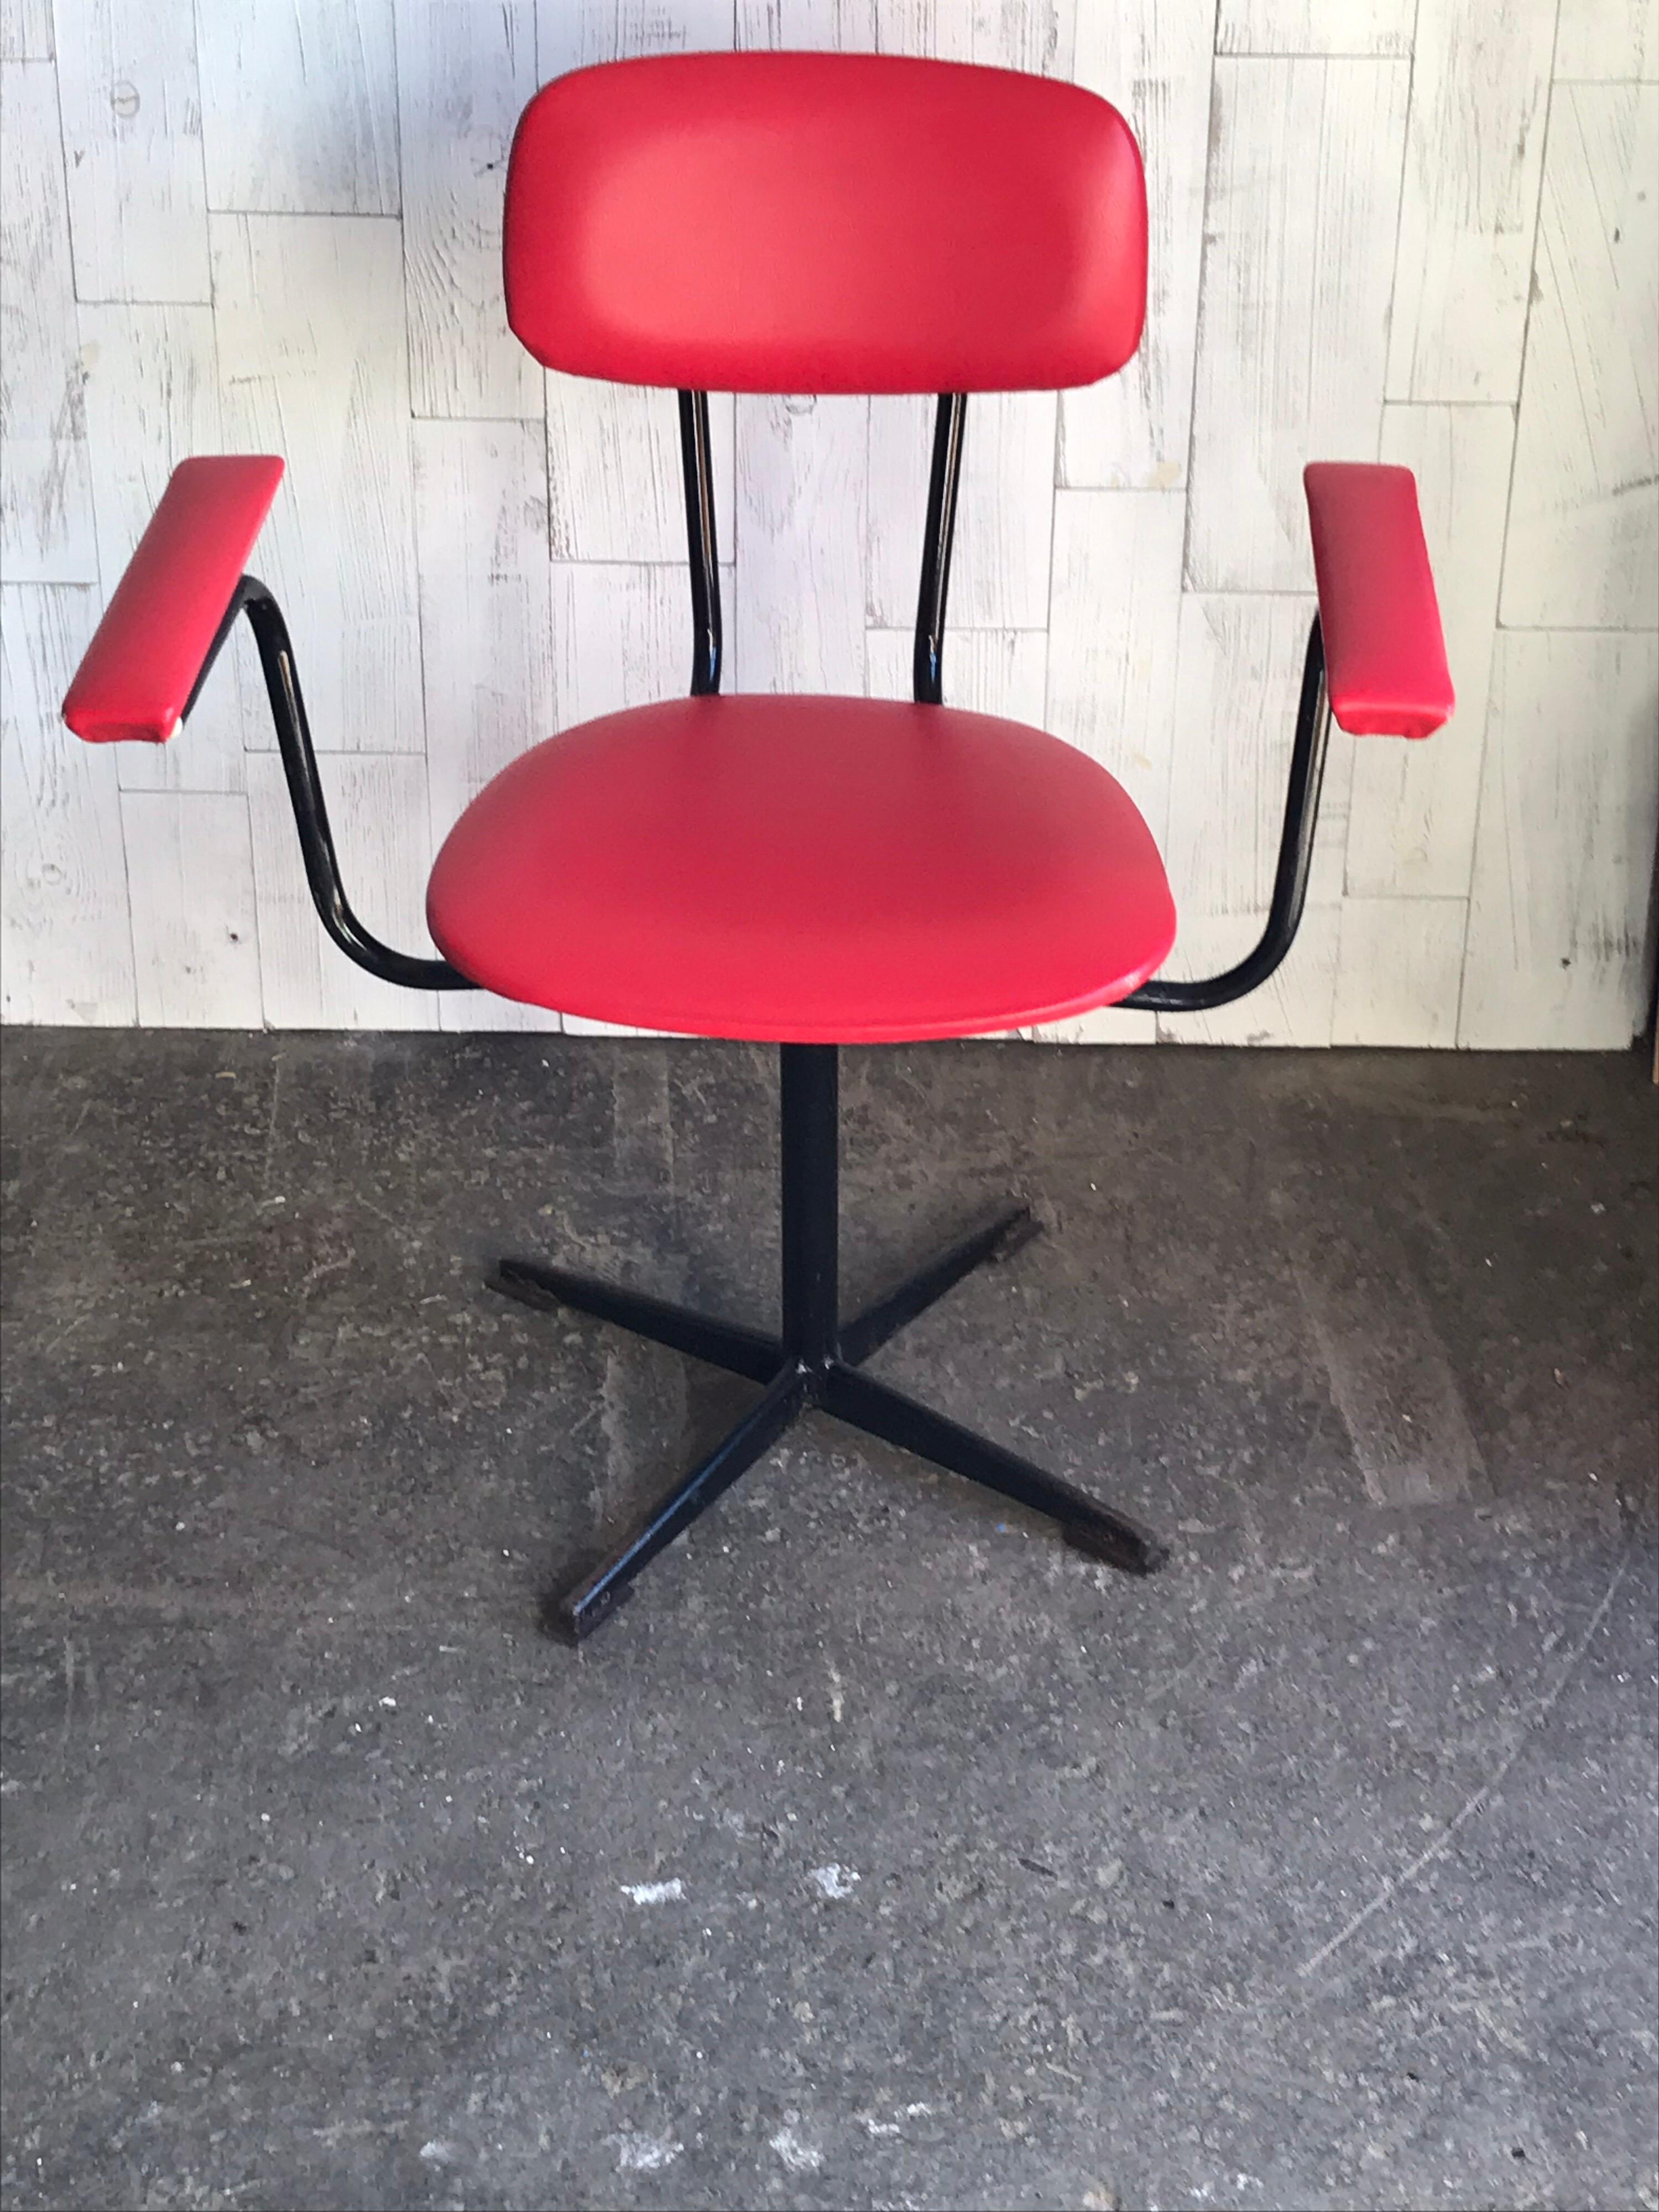 Hungarian Retro Chair from Hungary, circa 1960s For Sale